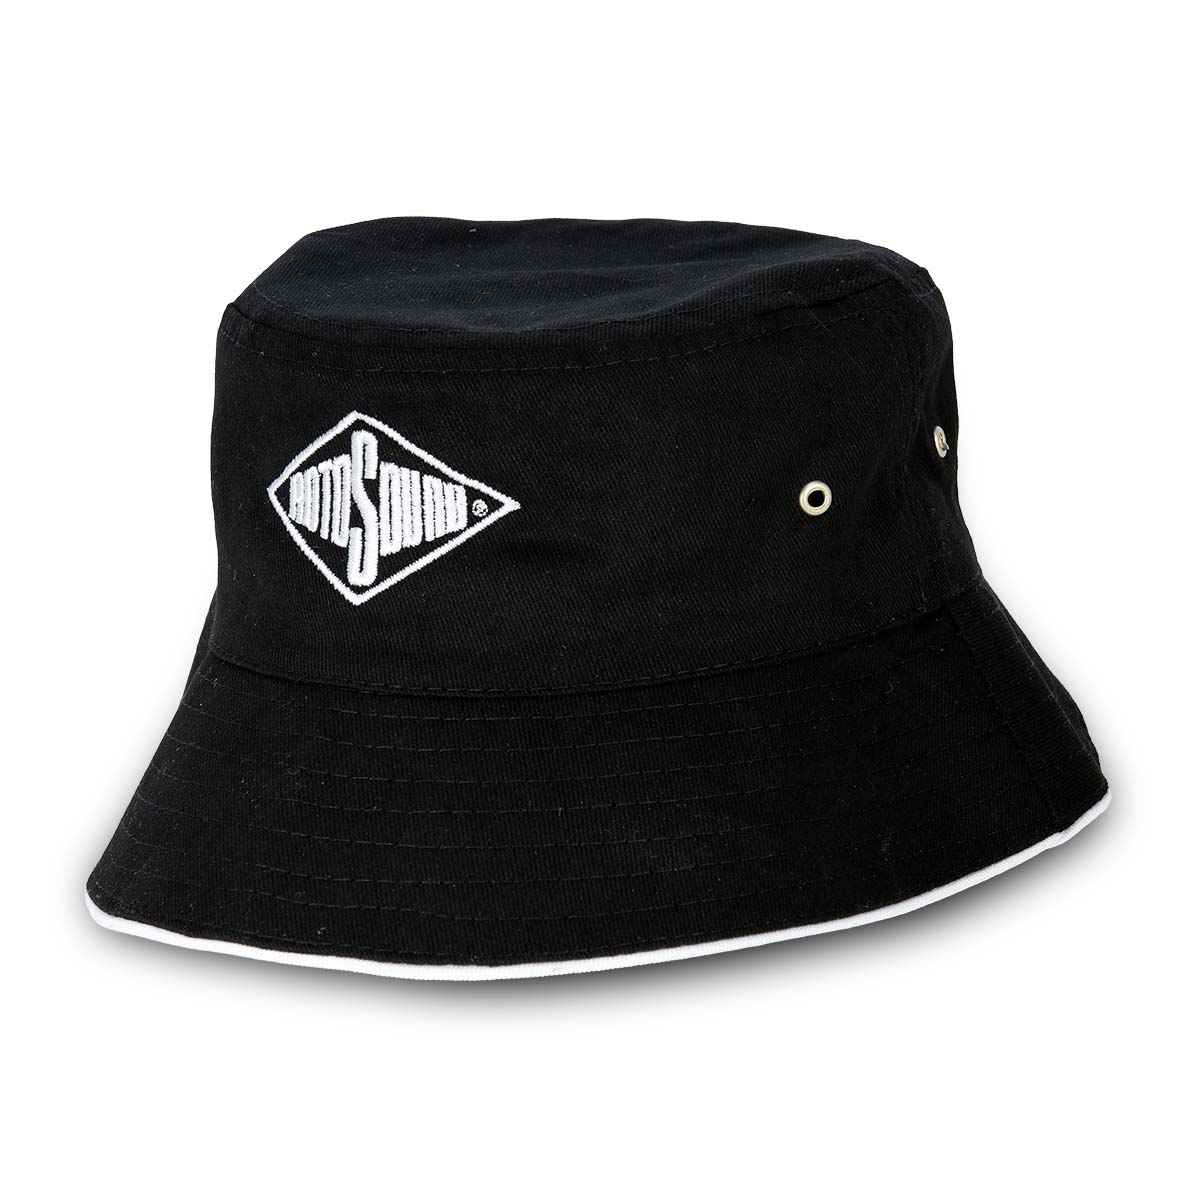 Rotosound Bucket Hat in Navy Blue • Rotosound Music Strings